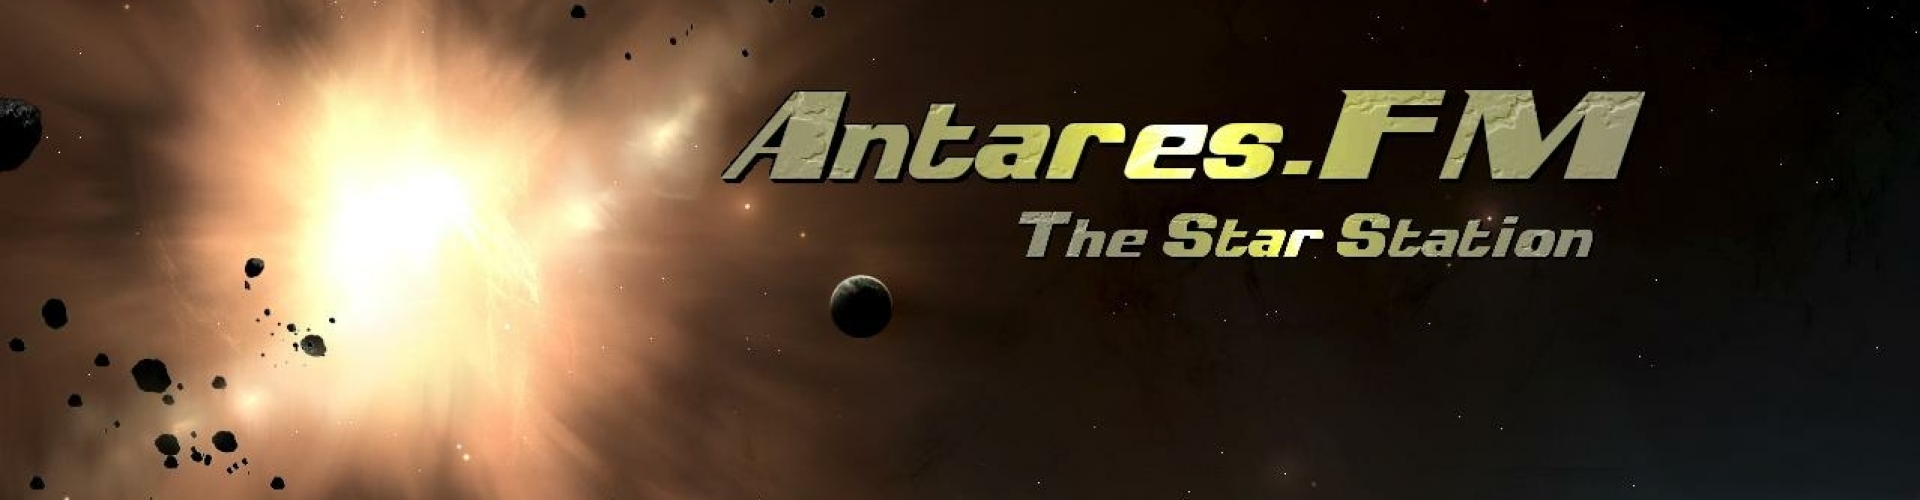 Antares FM The Star Station